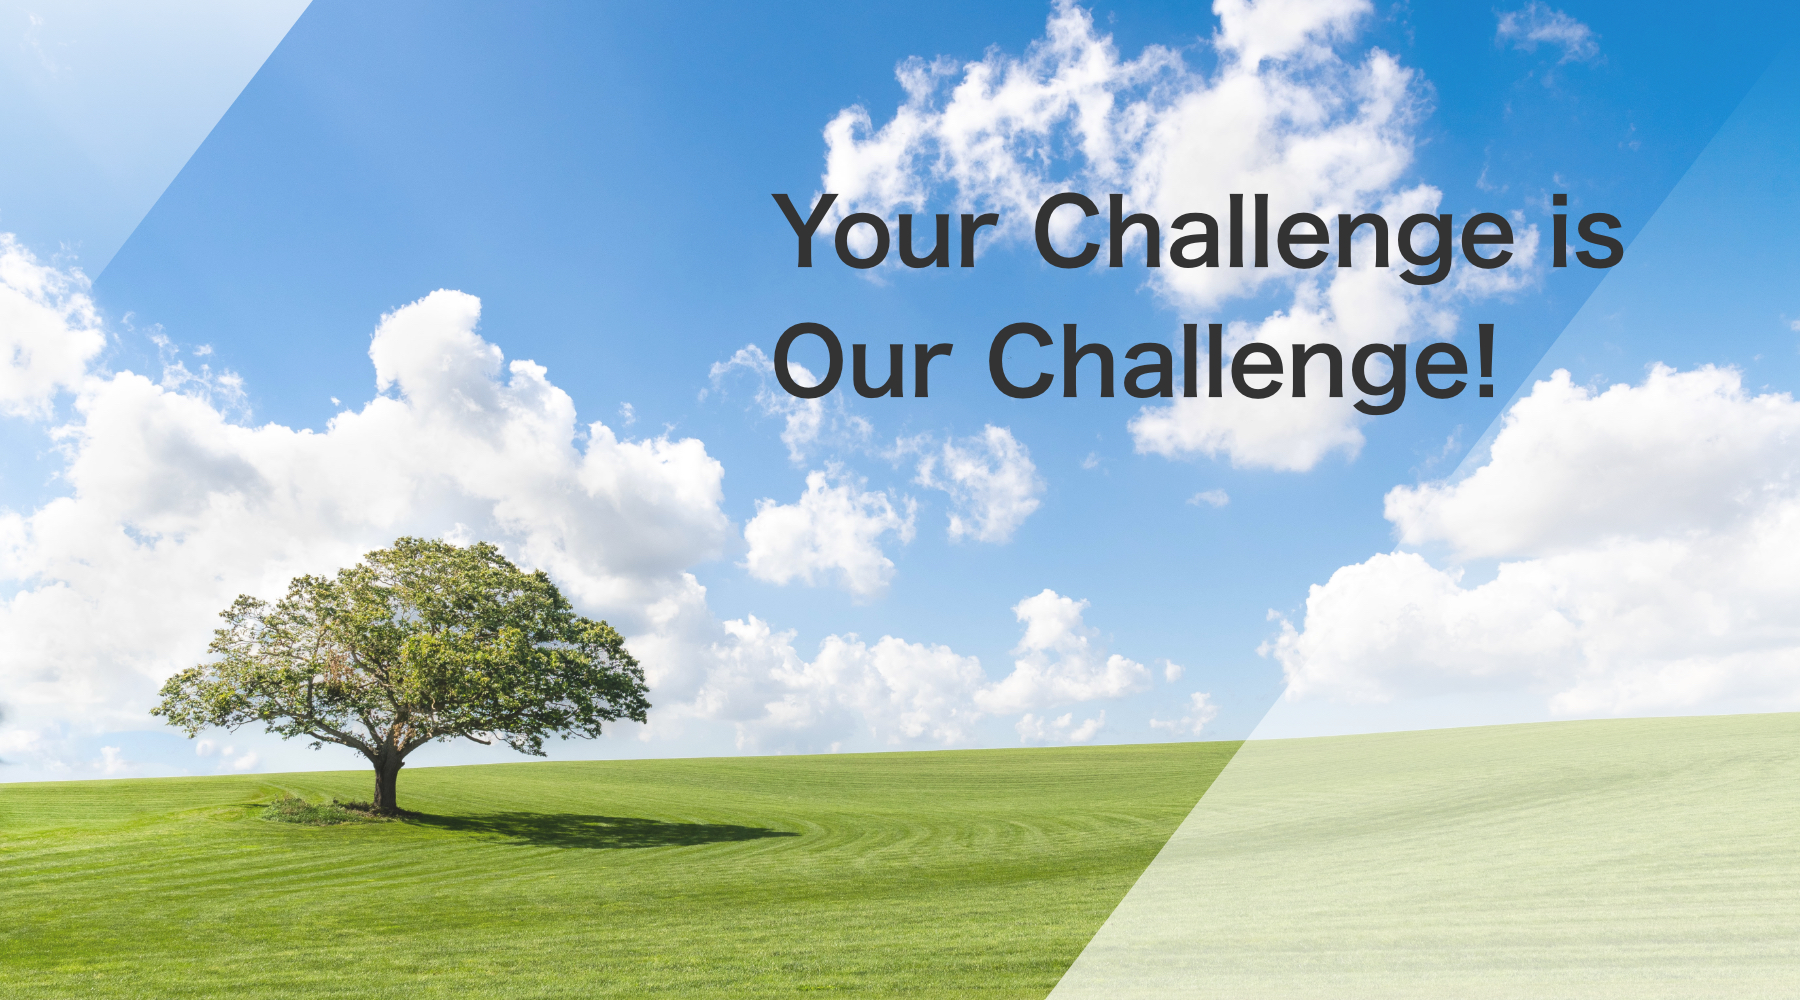 Your Challenge is Our Challenge!